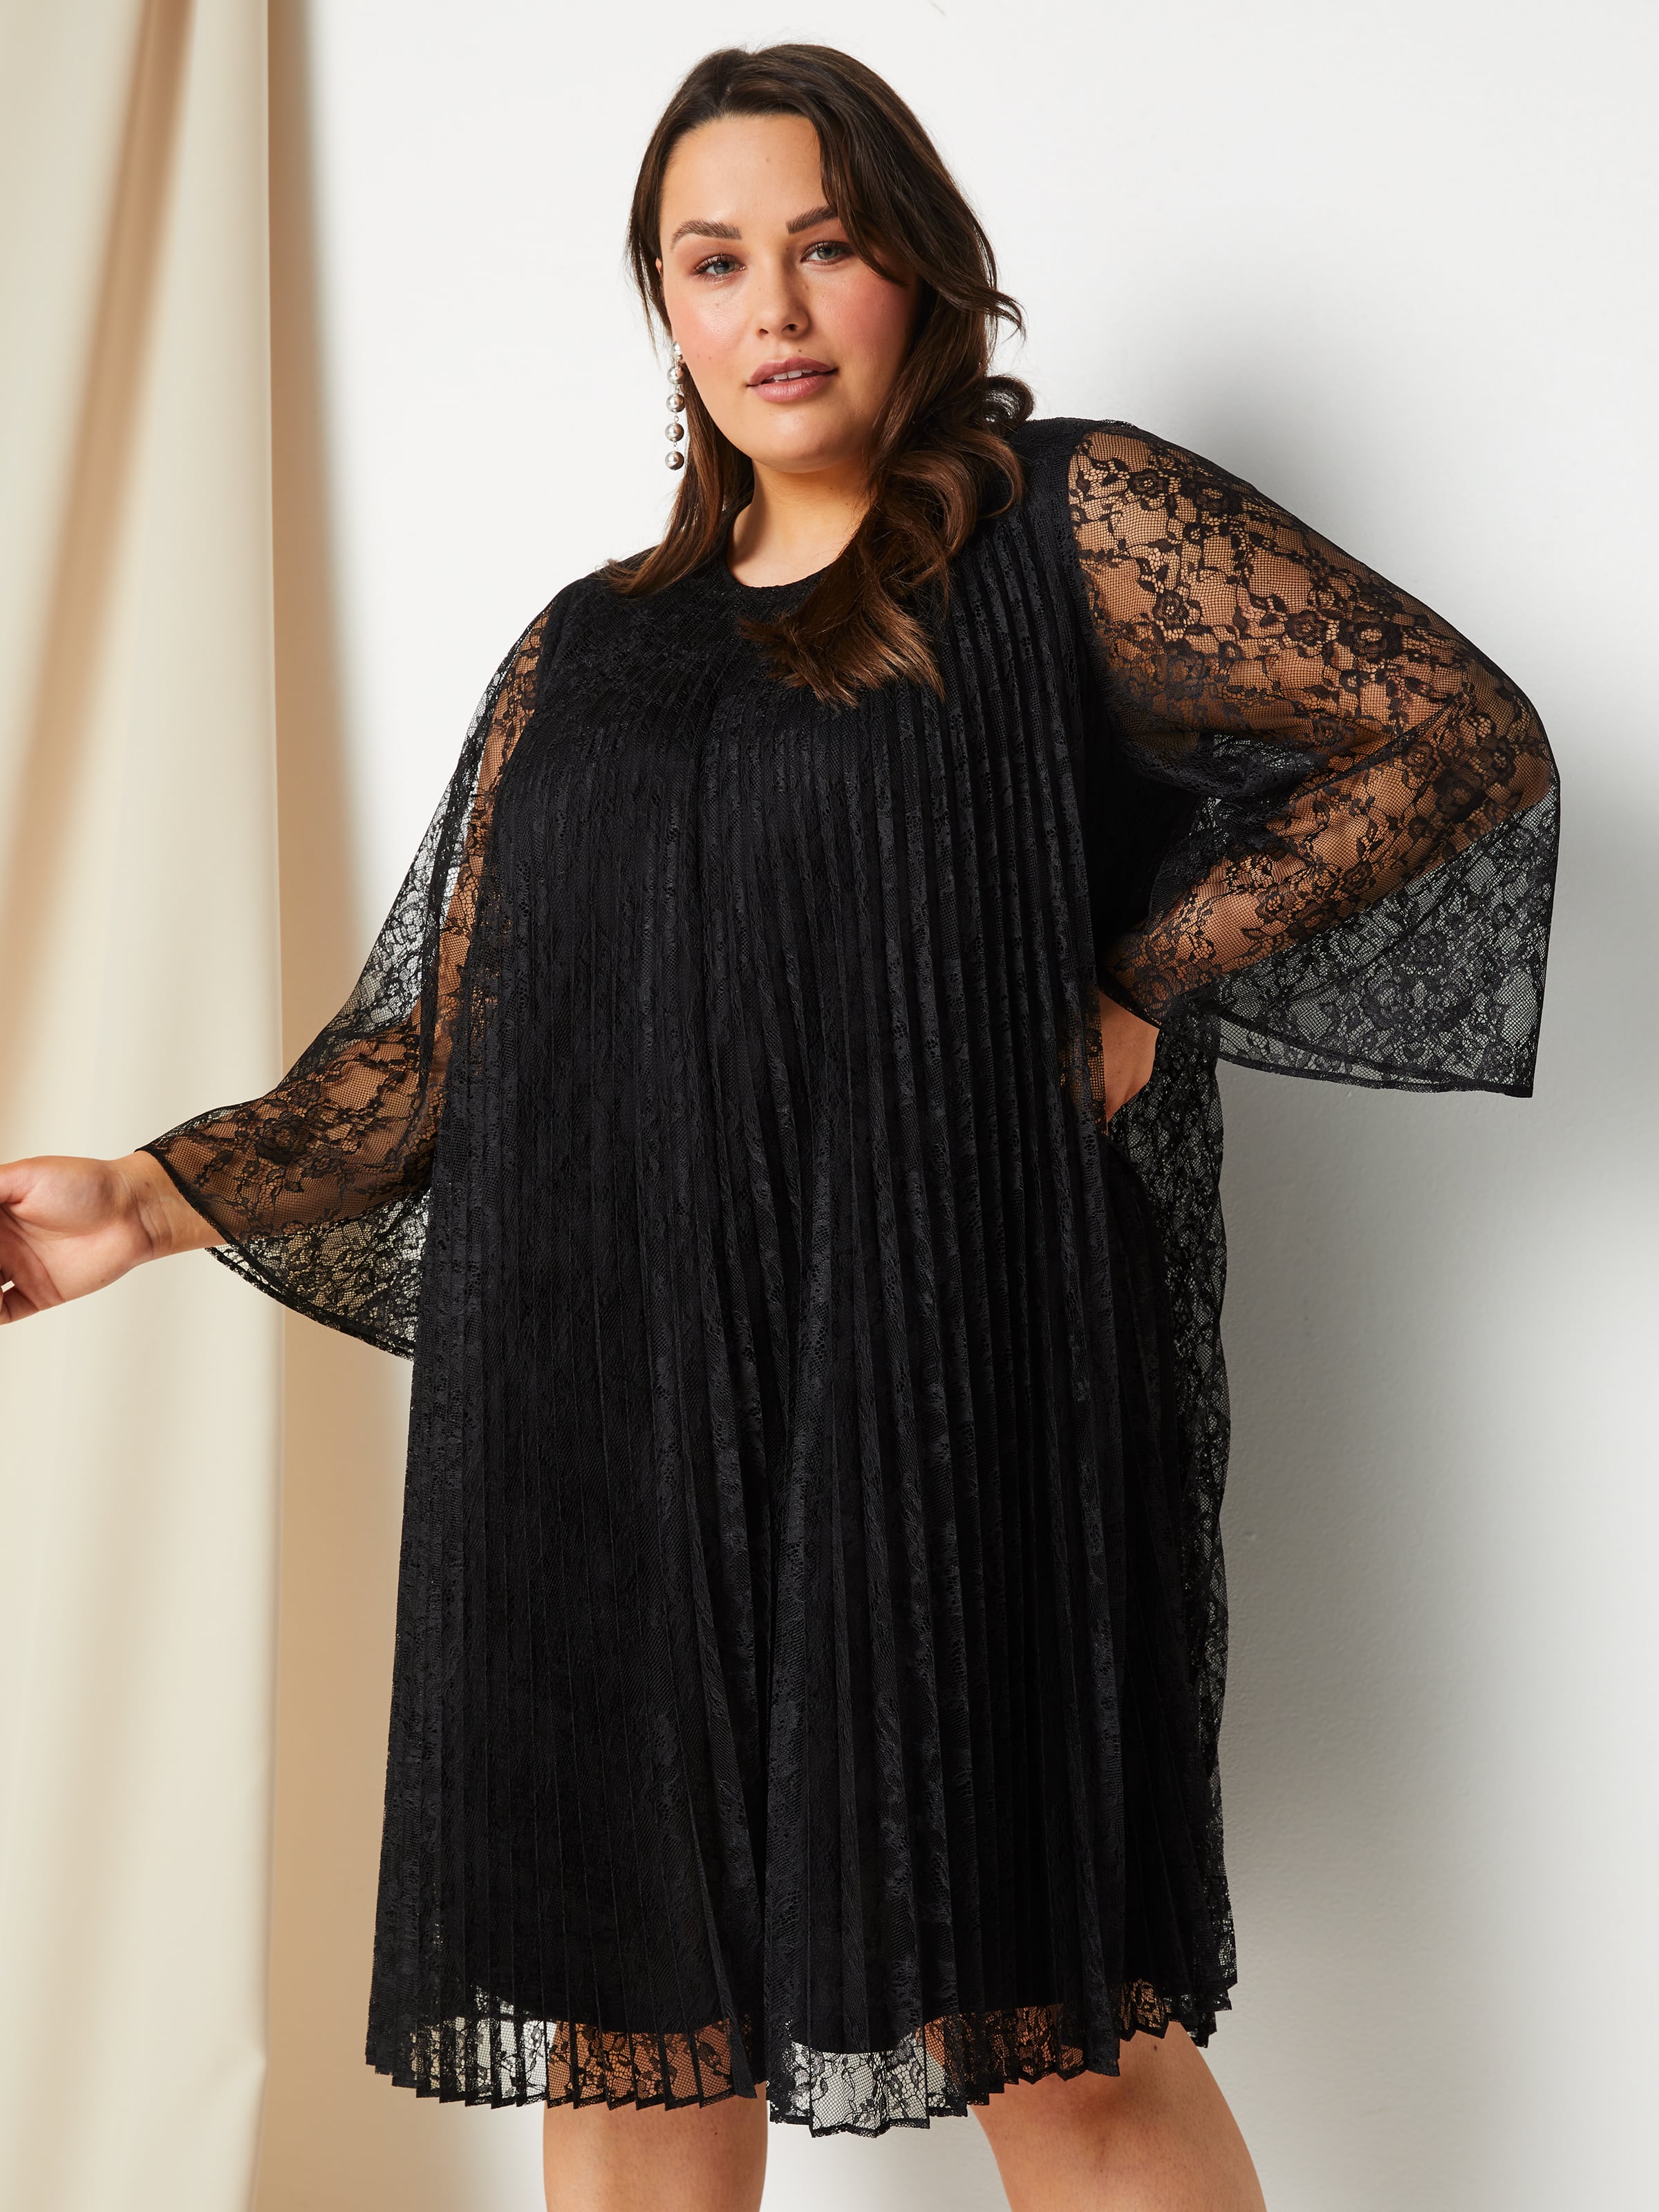 20+ Lace Dress With Flared Sleeves